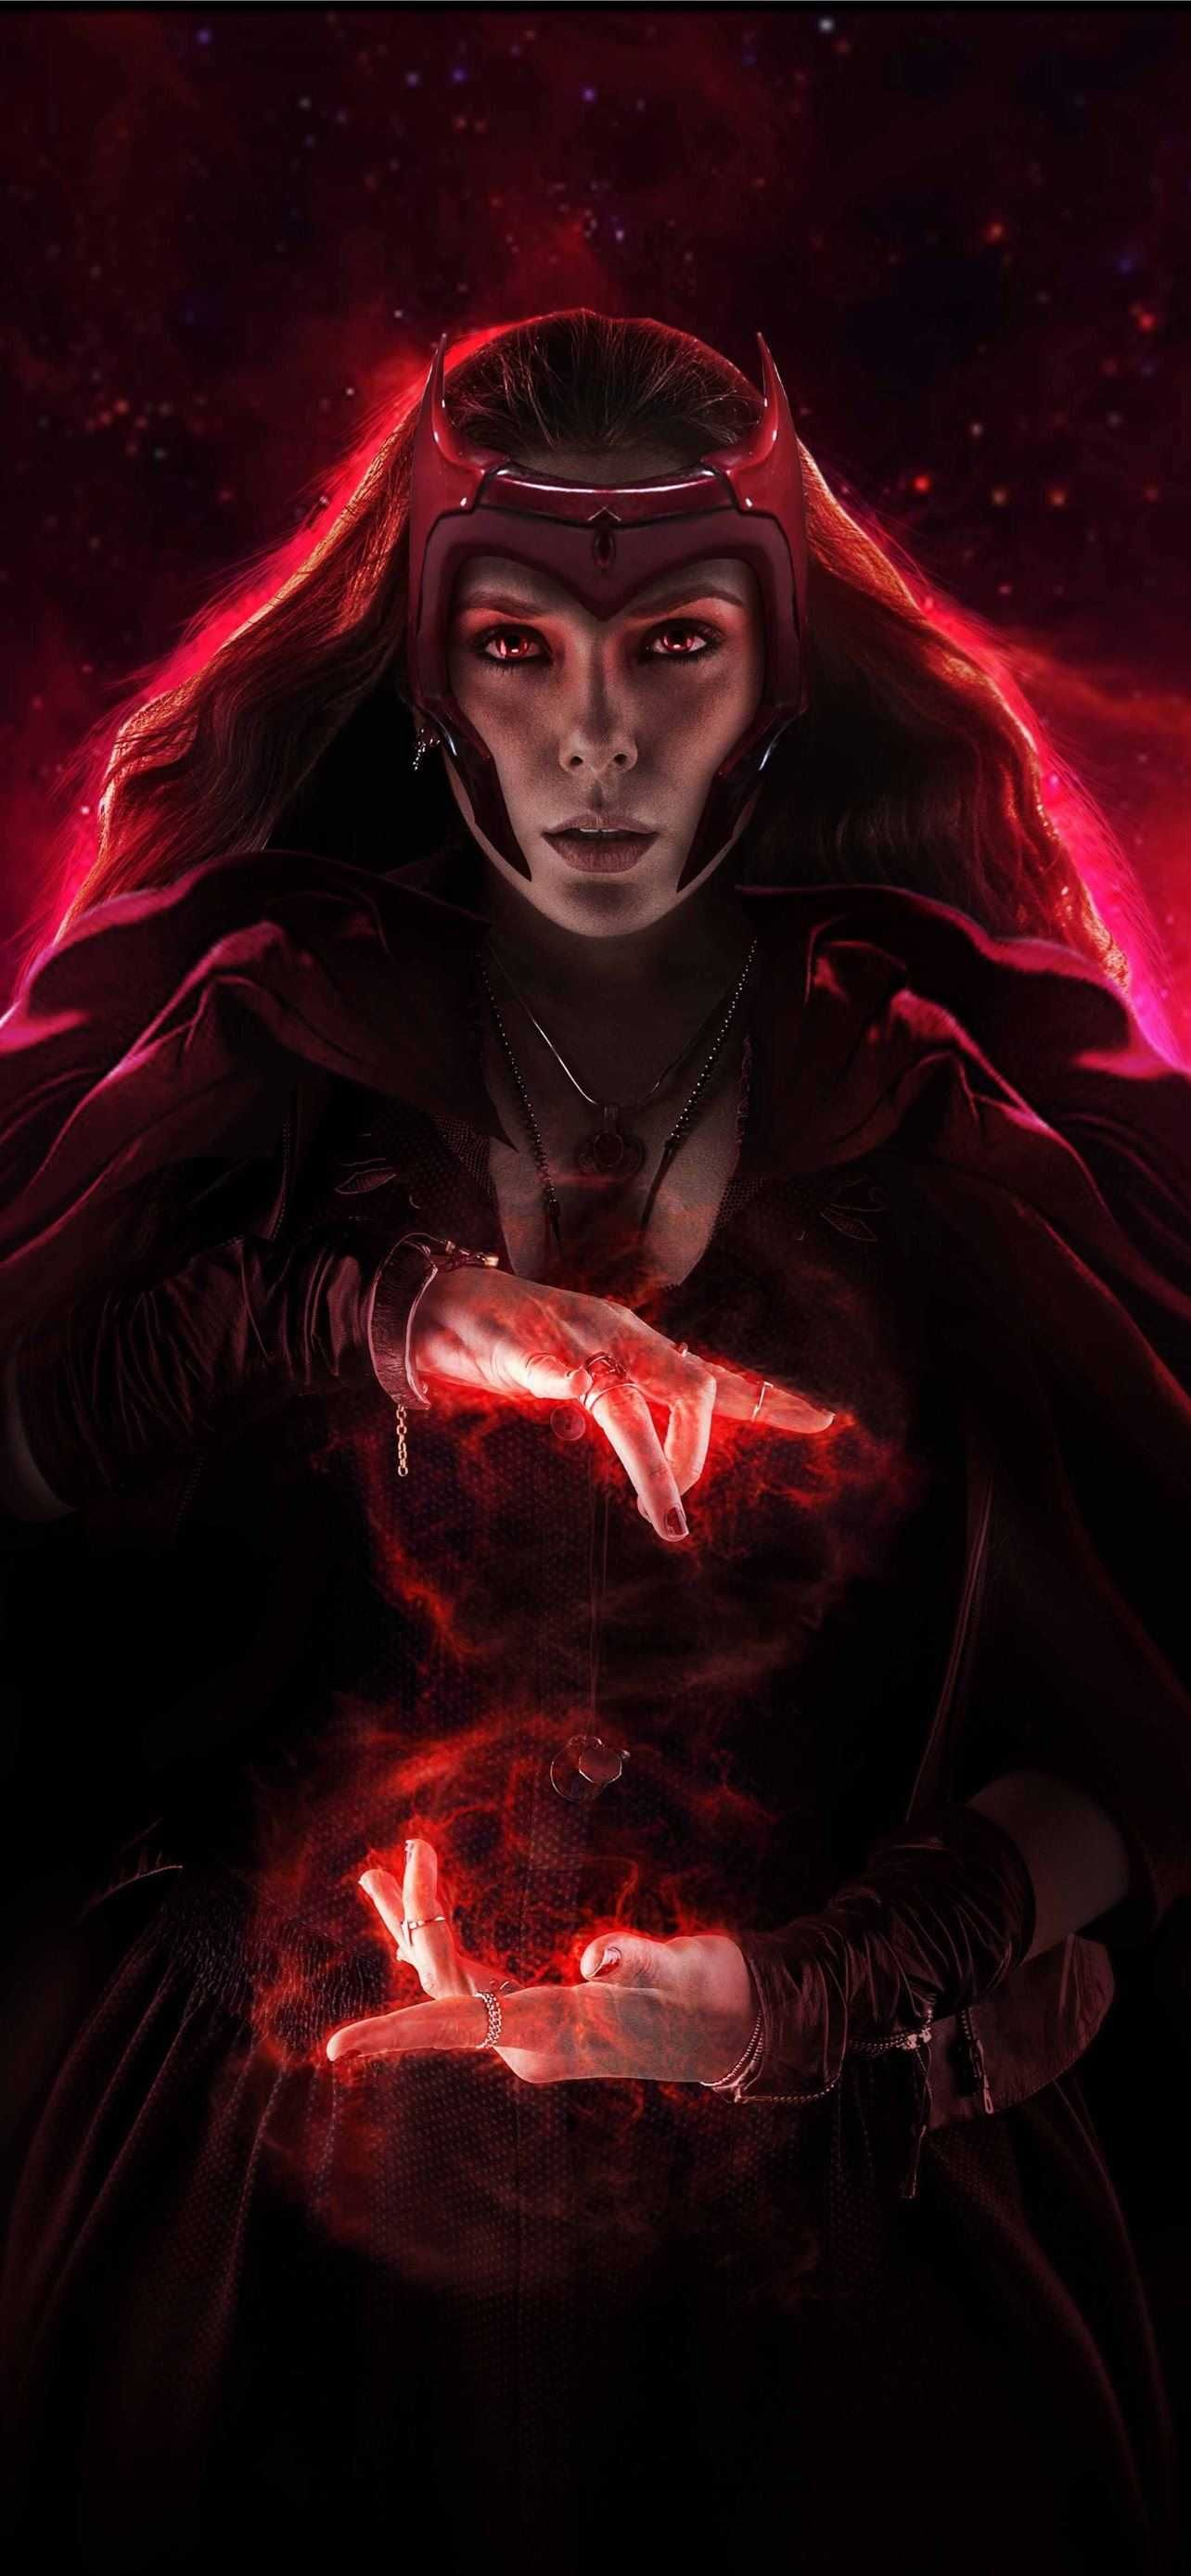 1284x2778 Scarlet Witch Wallpaper Browse Scarlet Witch Wallpaper with collections of Android, Avengers, Desktop, Iphon&acirc;&#128;&brvbar; in 2022 | Scarlet witch marvel, Scarlet witch, Witch wallpaper